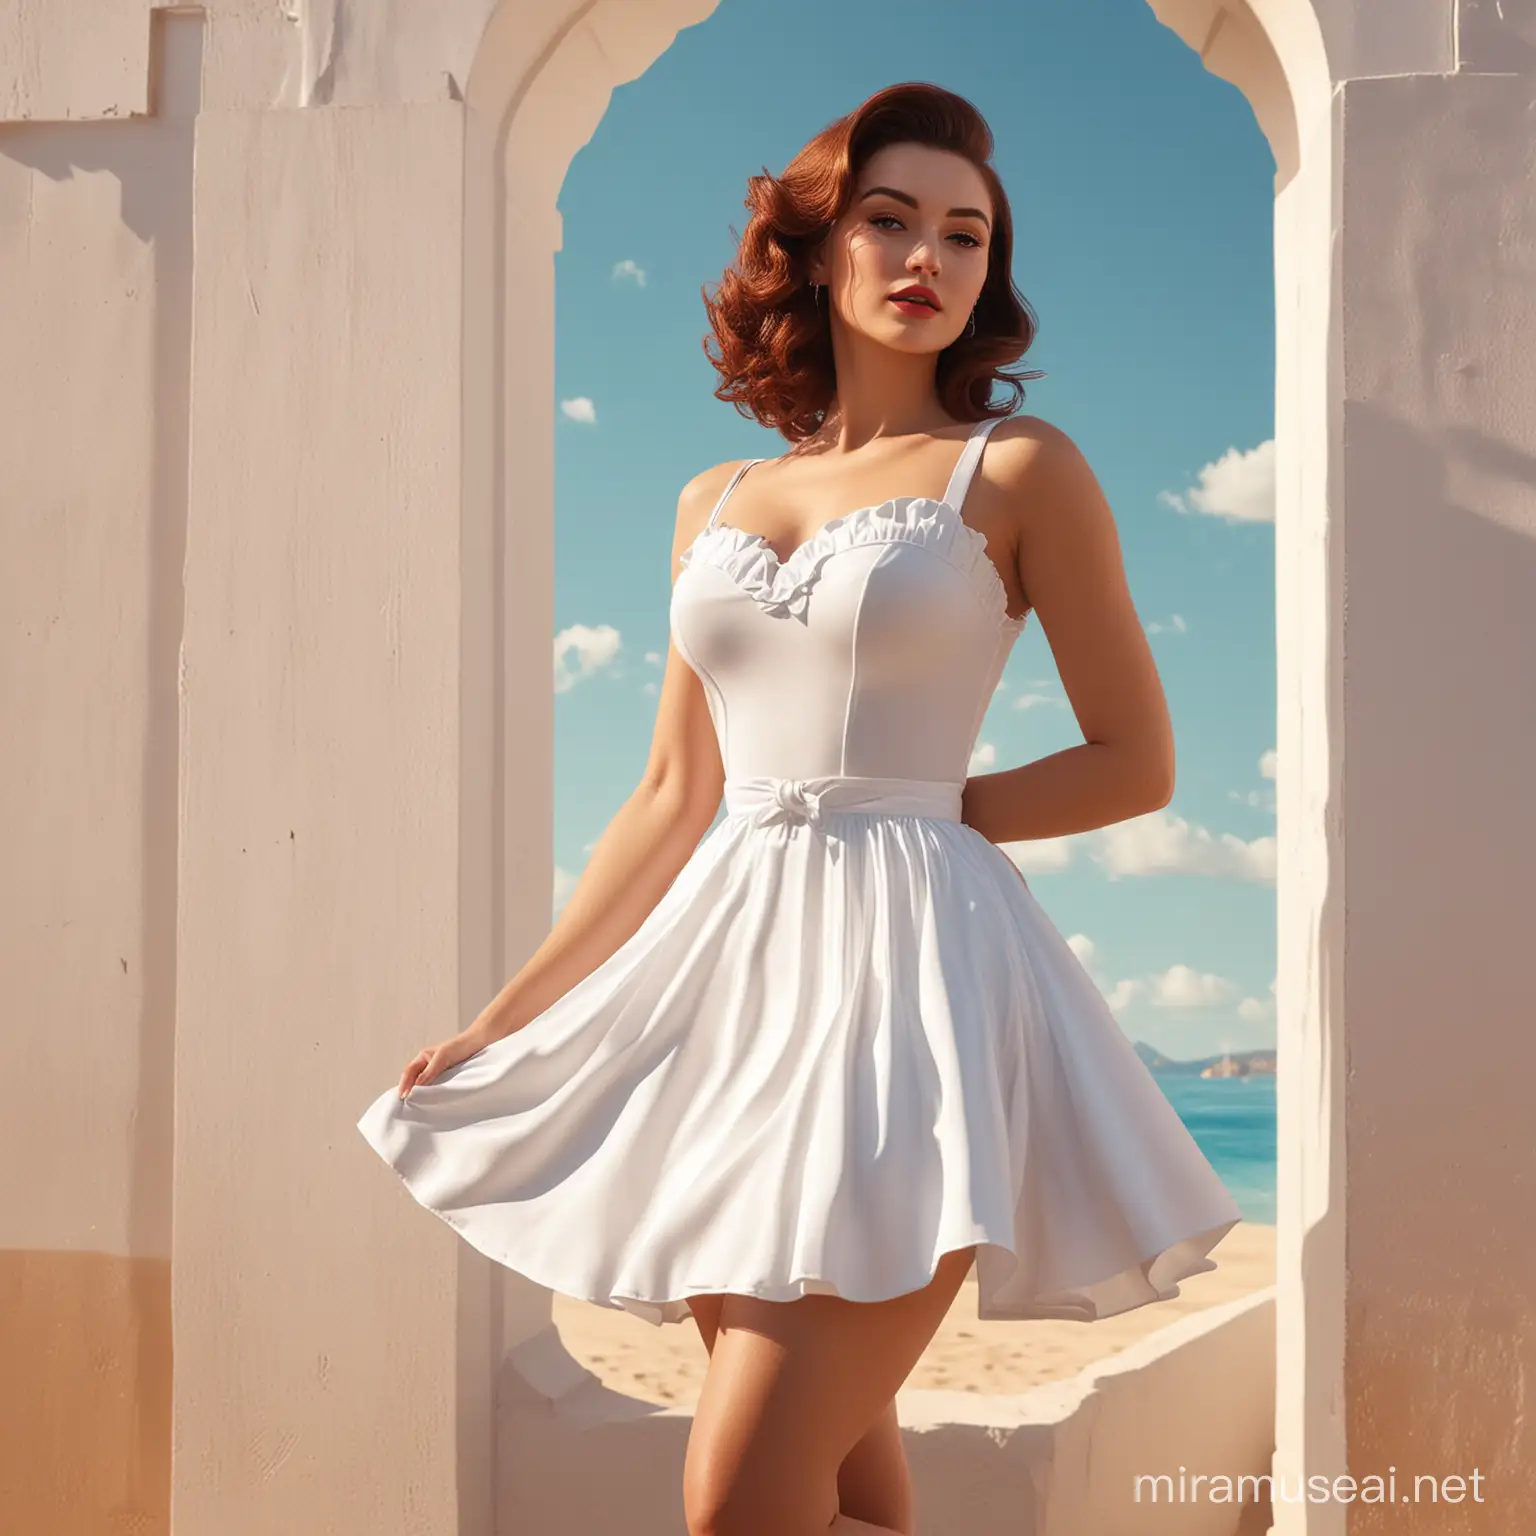 Sultry Pinup Model Luis Arcy in Sunlit White Dress 3D Render Fashion Art